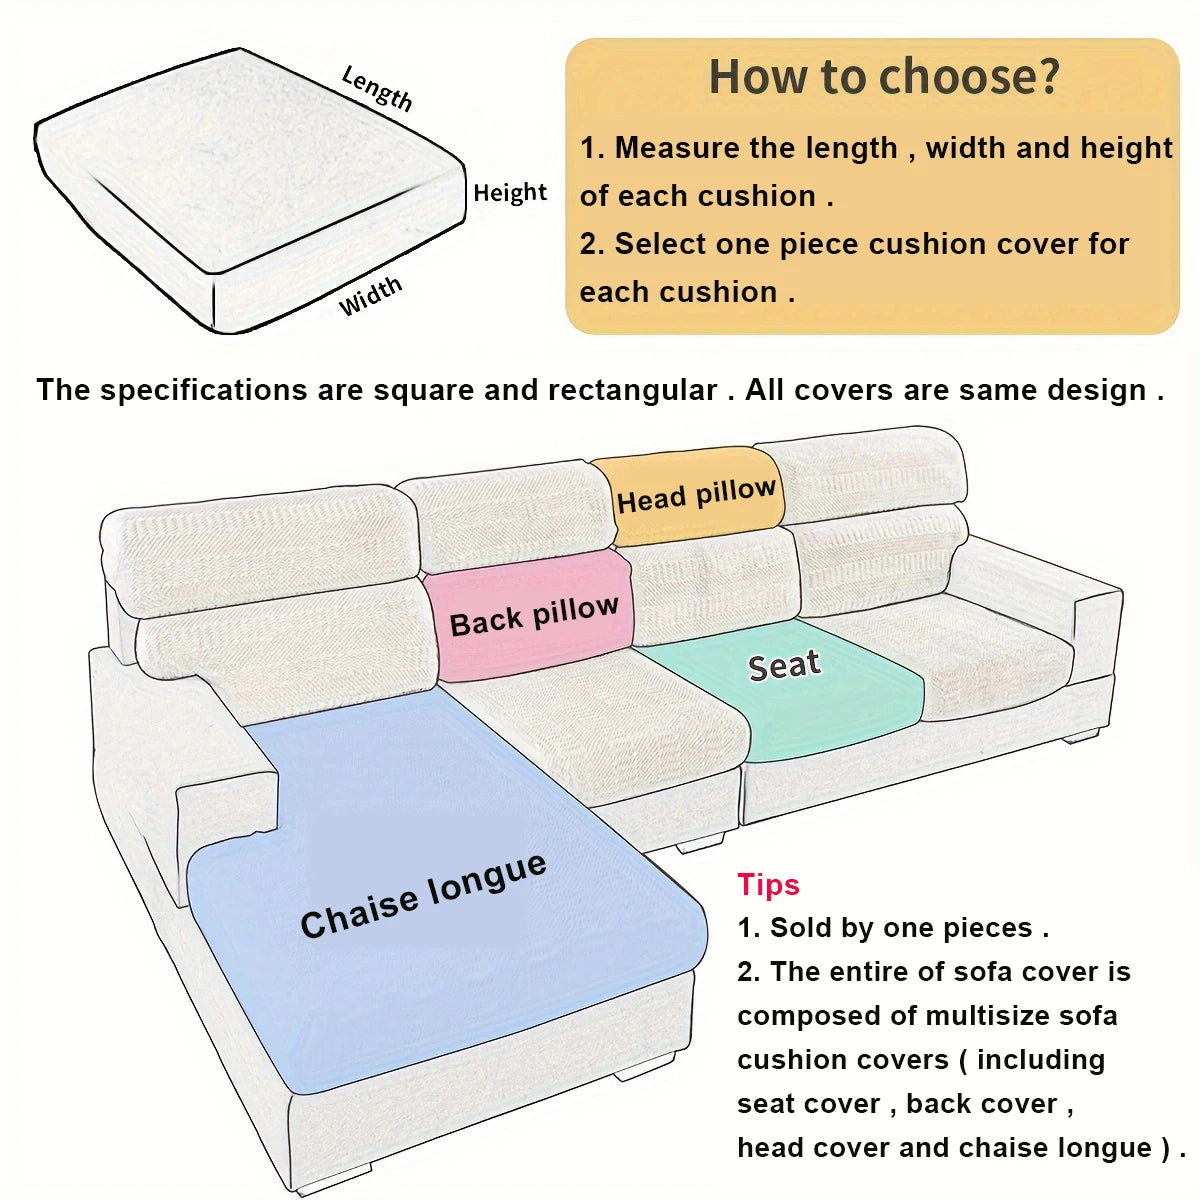 Stretchable Thicken Sofa Cover for Furniture Protection and Style